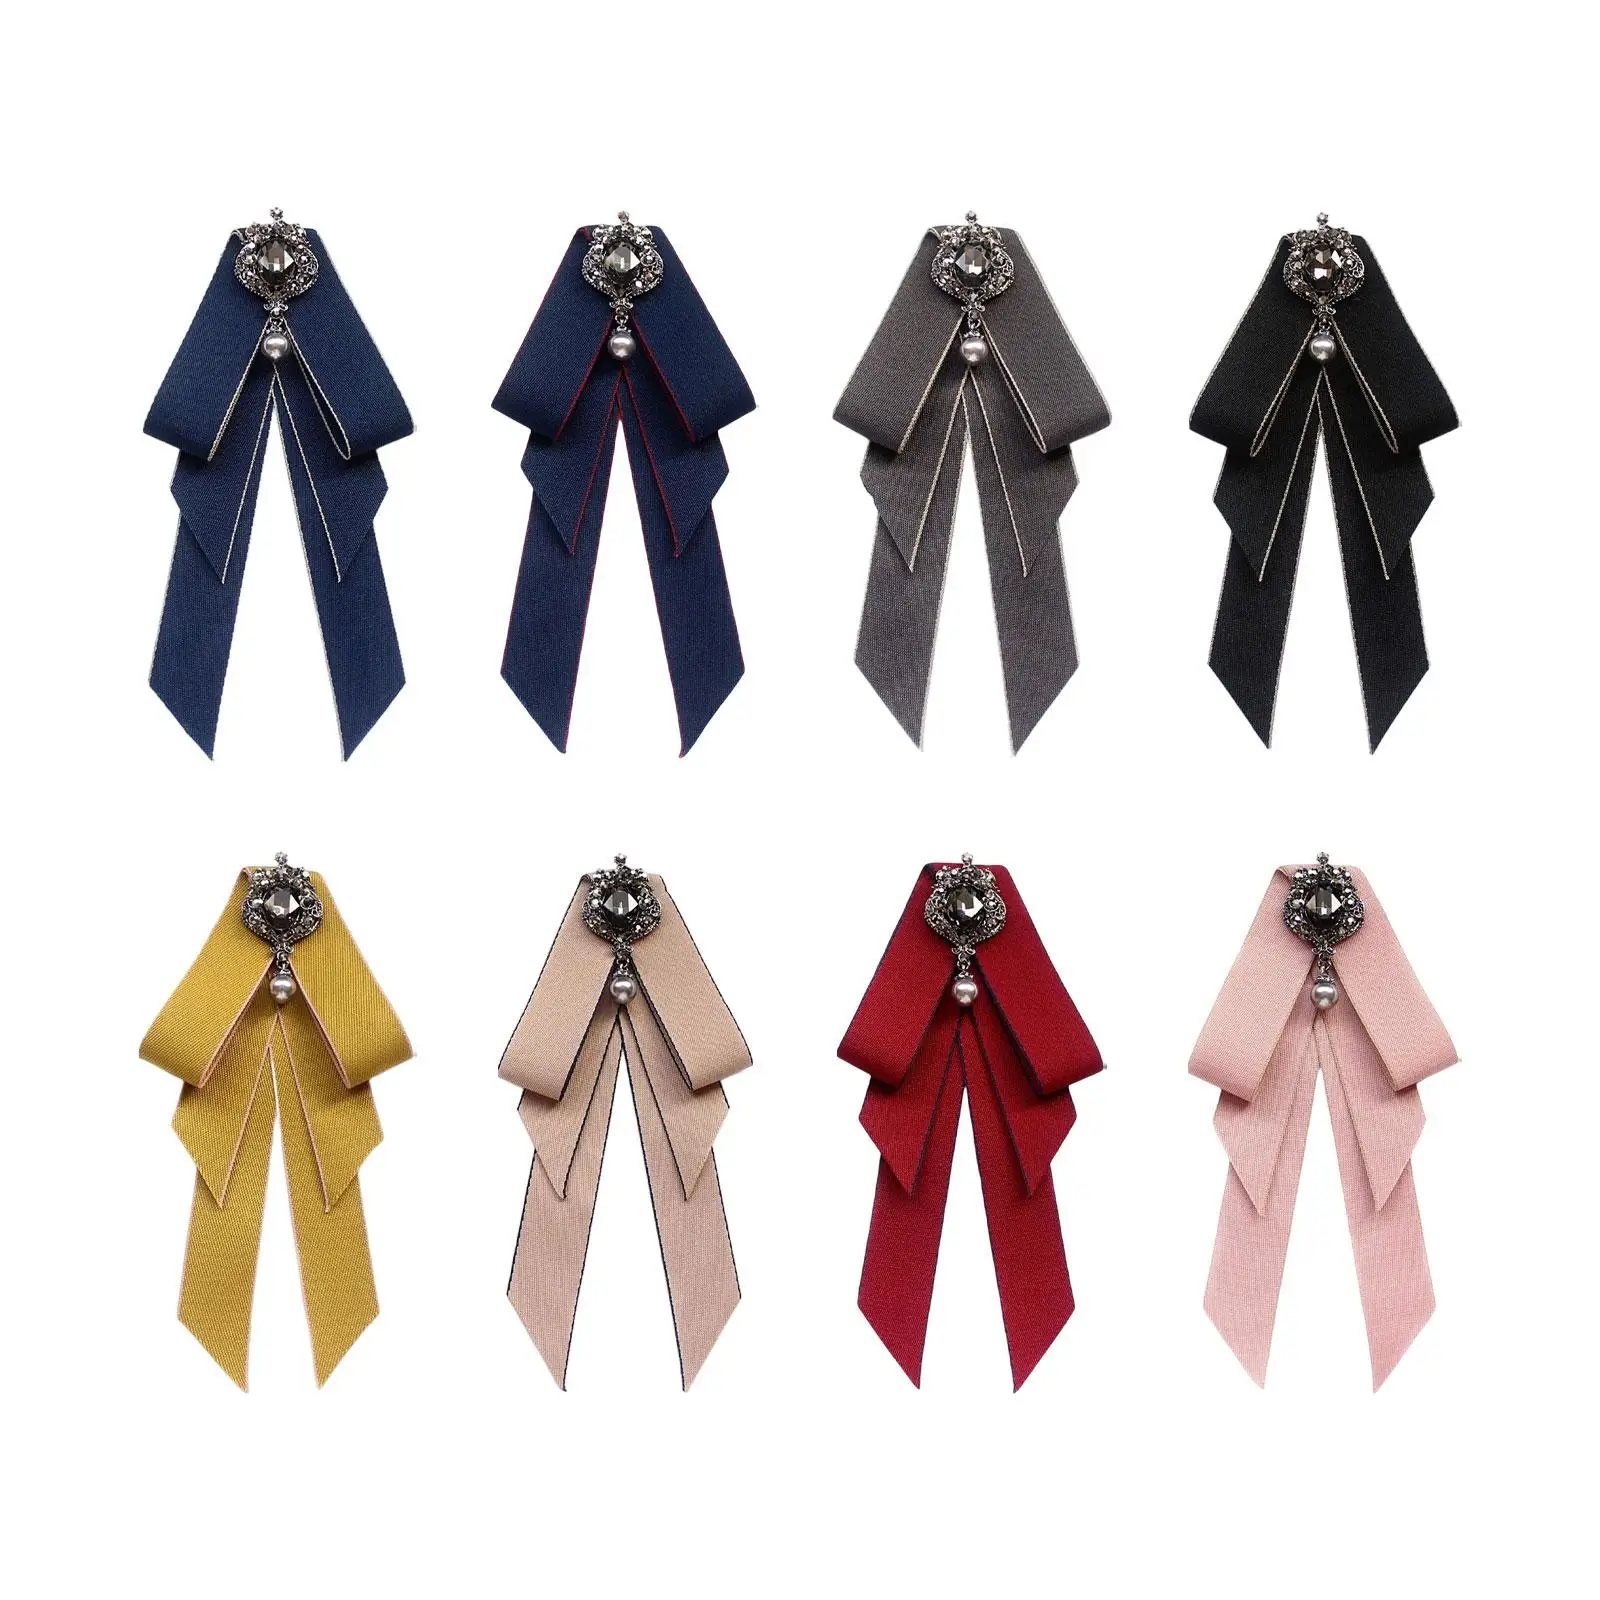 Women` Tied Bow Tie Classic Clothing Accessories Ribbon Teens Necktie Bowties for Prom Banquet Suit Party Wedding